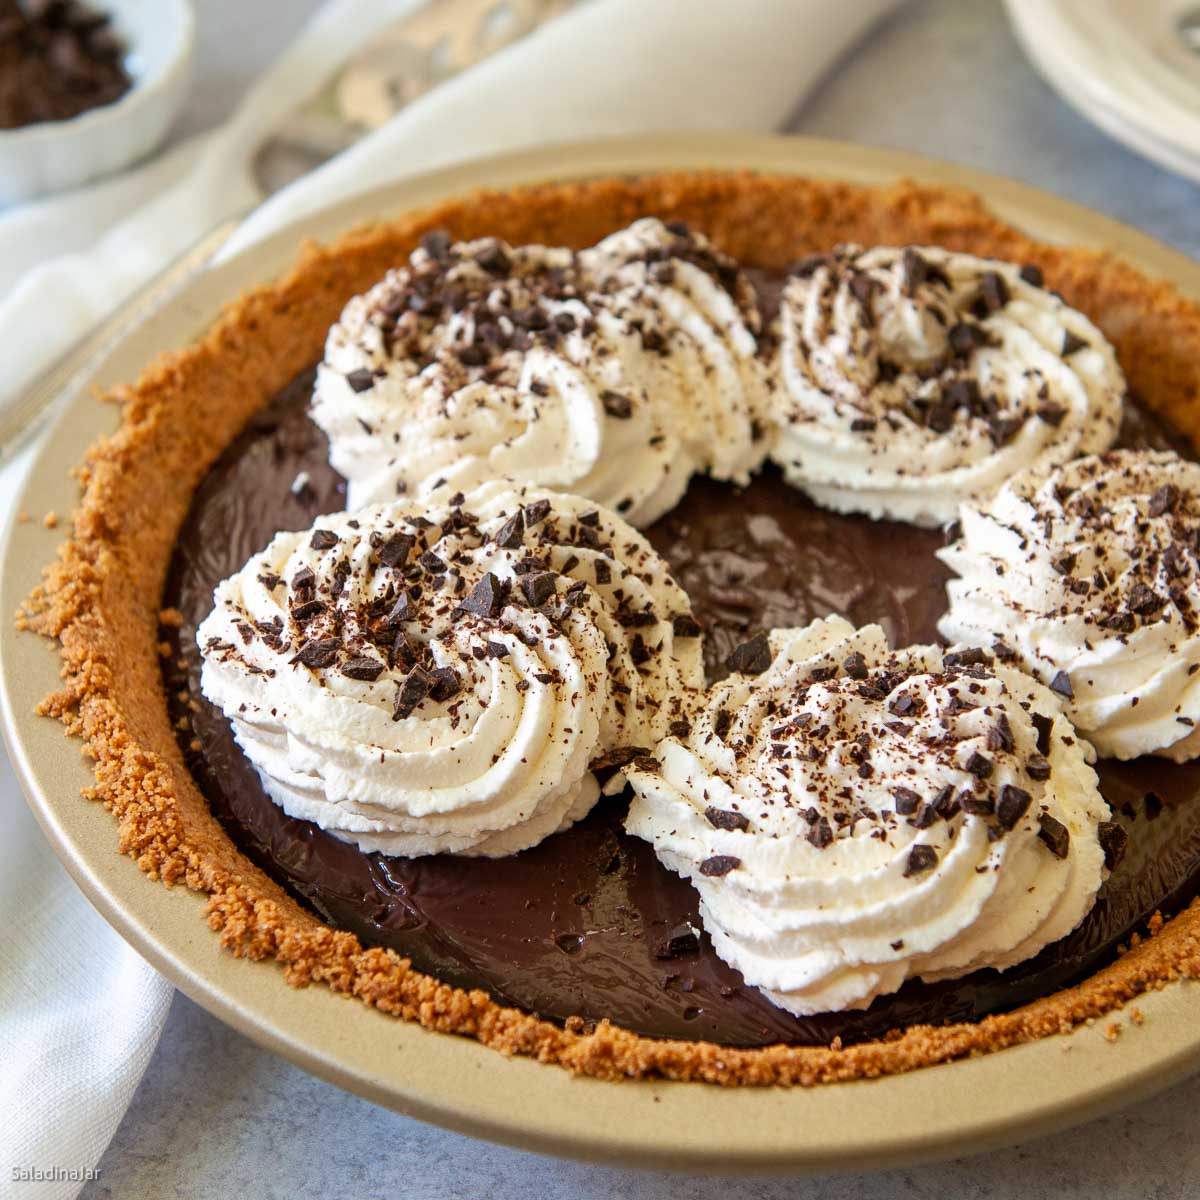 microwave chocolate pie garnished with shipped cream and choolate shavings.